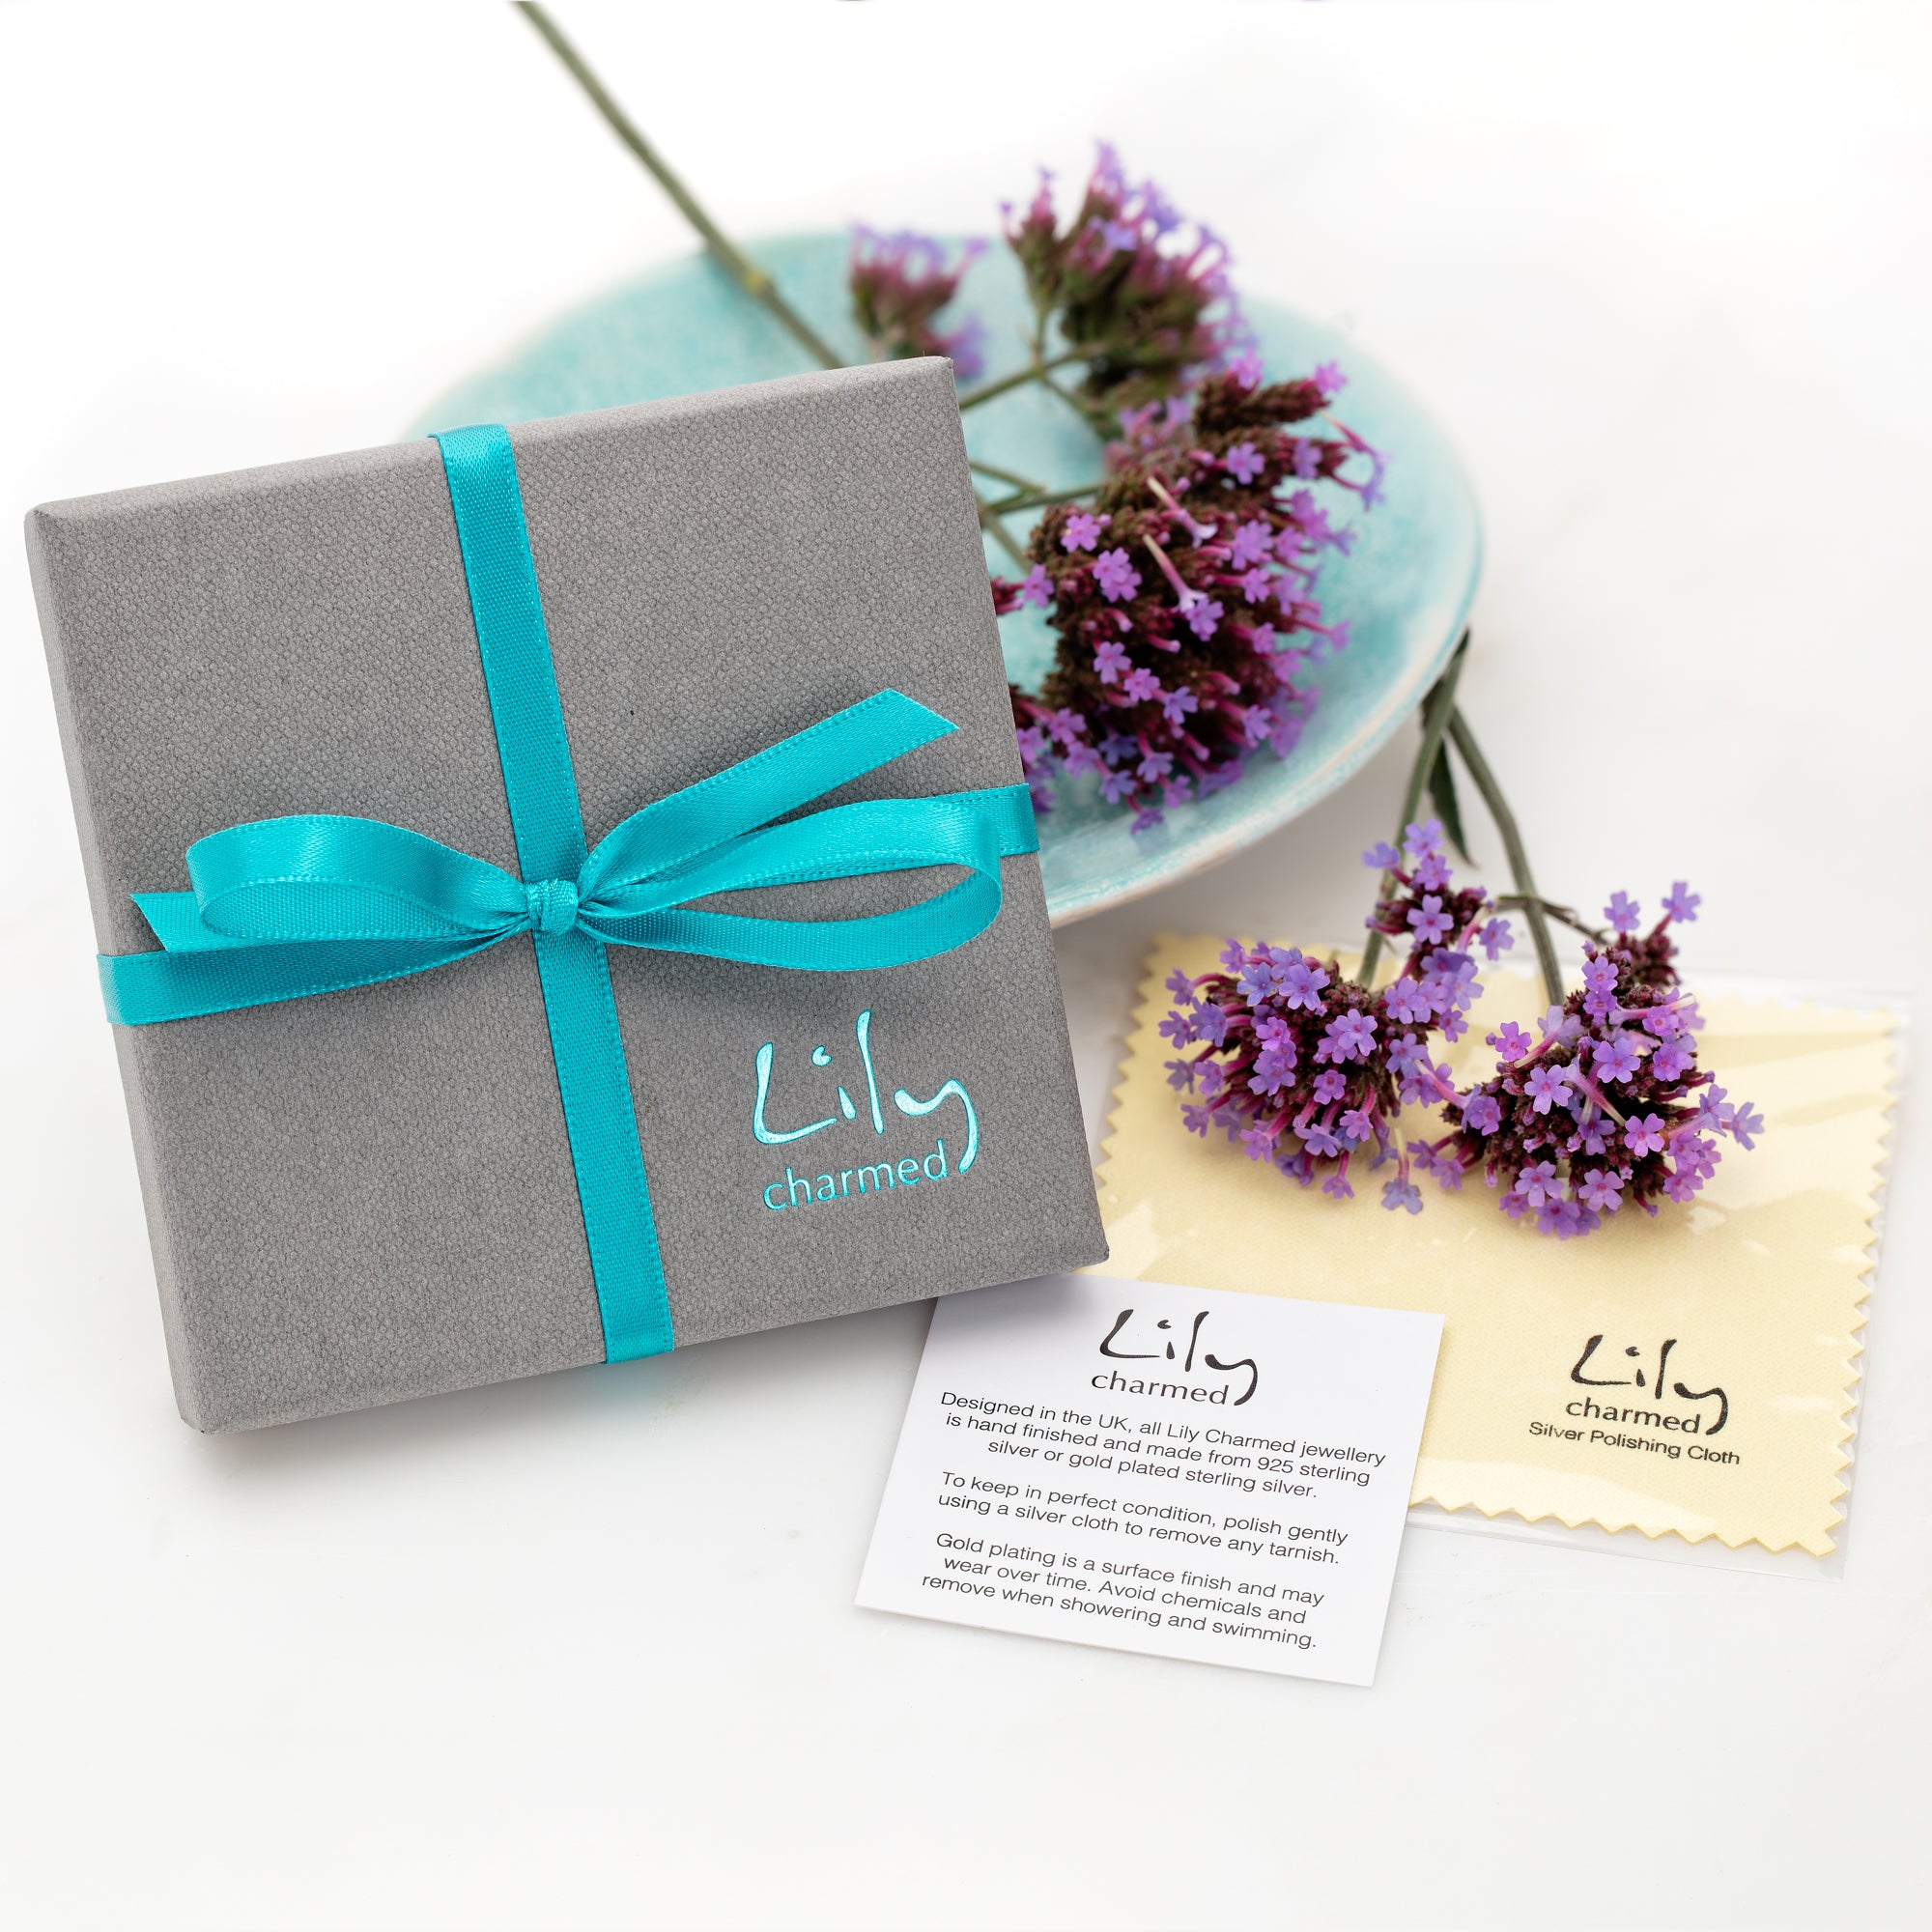 Free Gift Box and Polishing Cloth with every Lily Charmed Order